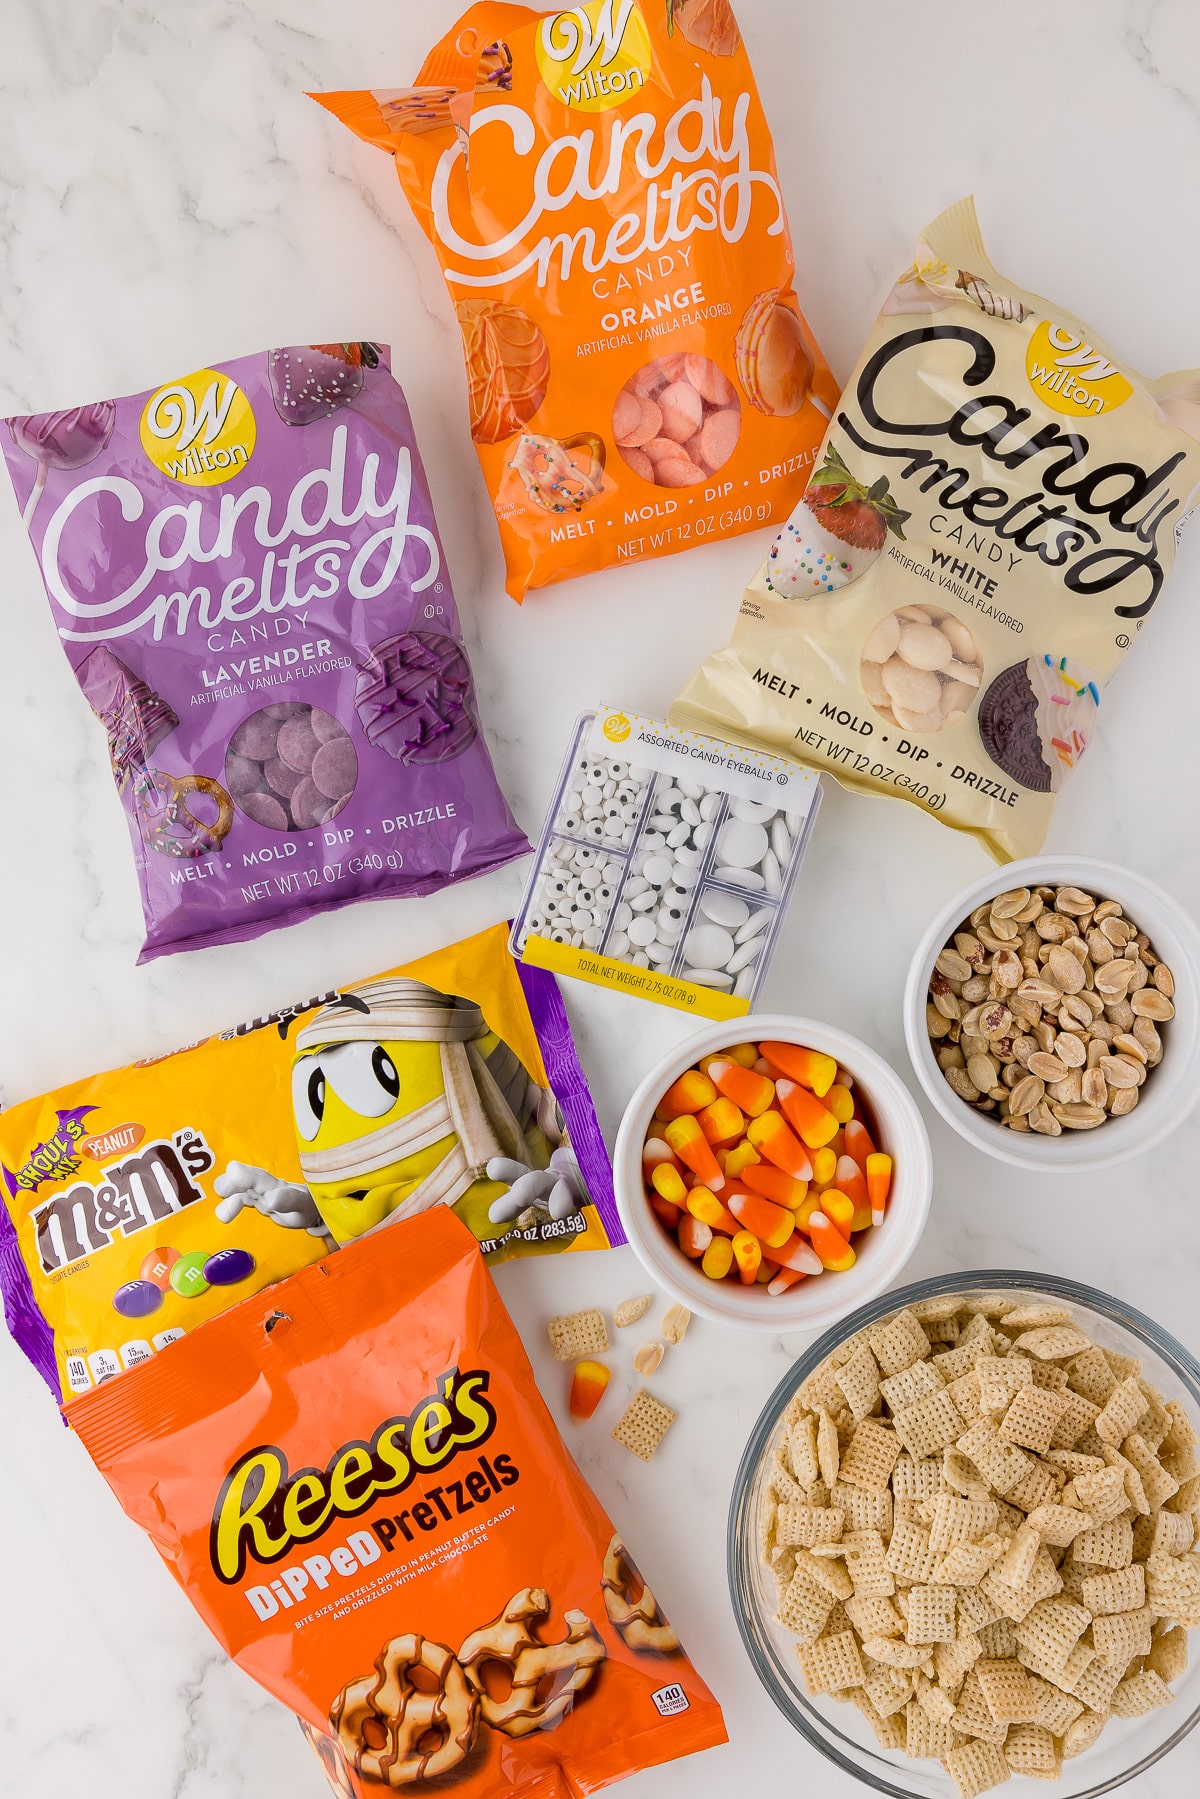 ingredients for monster munch, wilton candy melts, candy eyes, m&m's, reese's dipped pretzels, candy corn, chex cereal, and shelled peanuts